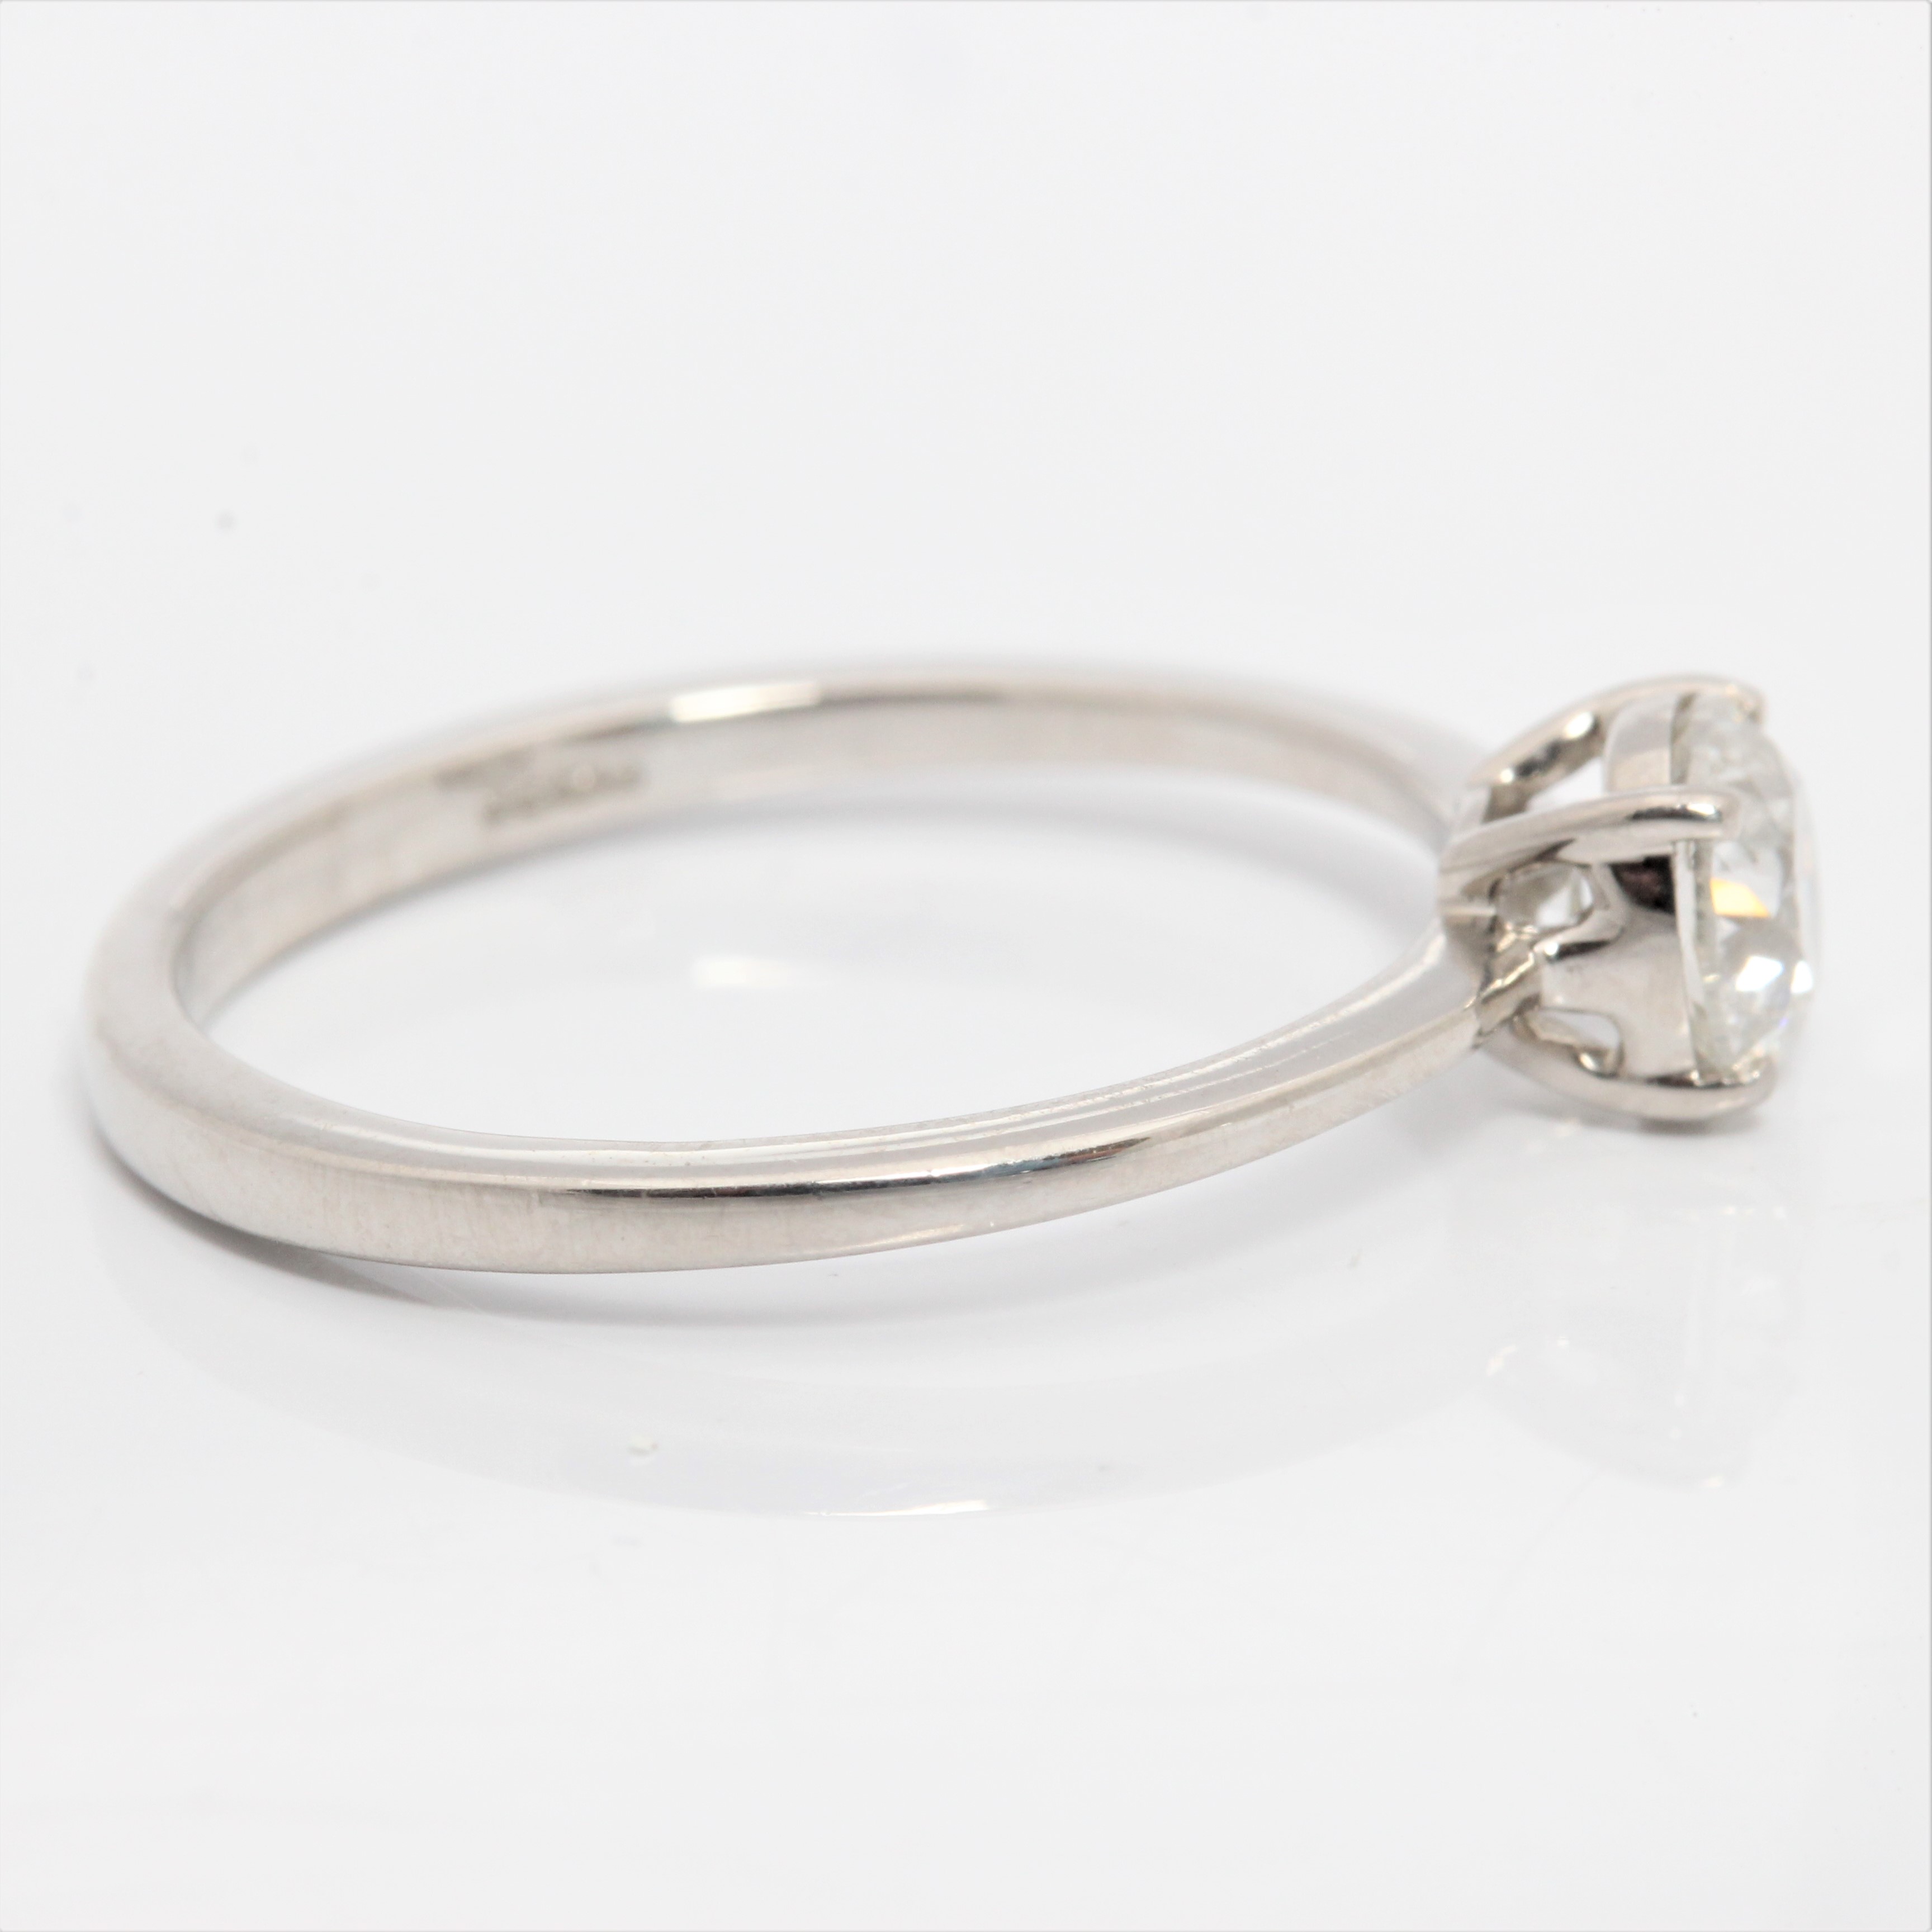 A hallmarked platinum diamond solitaire ring, set with a round brilliant cut diamond measuring - Image 2 of 4